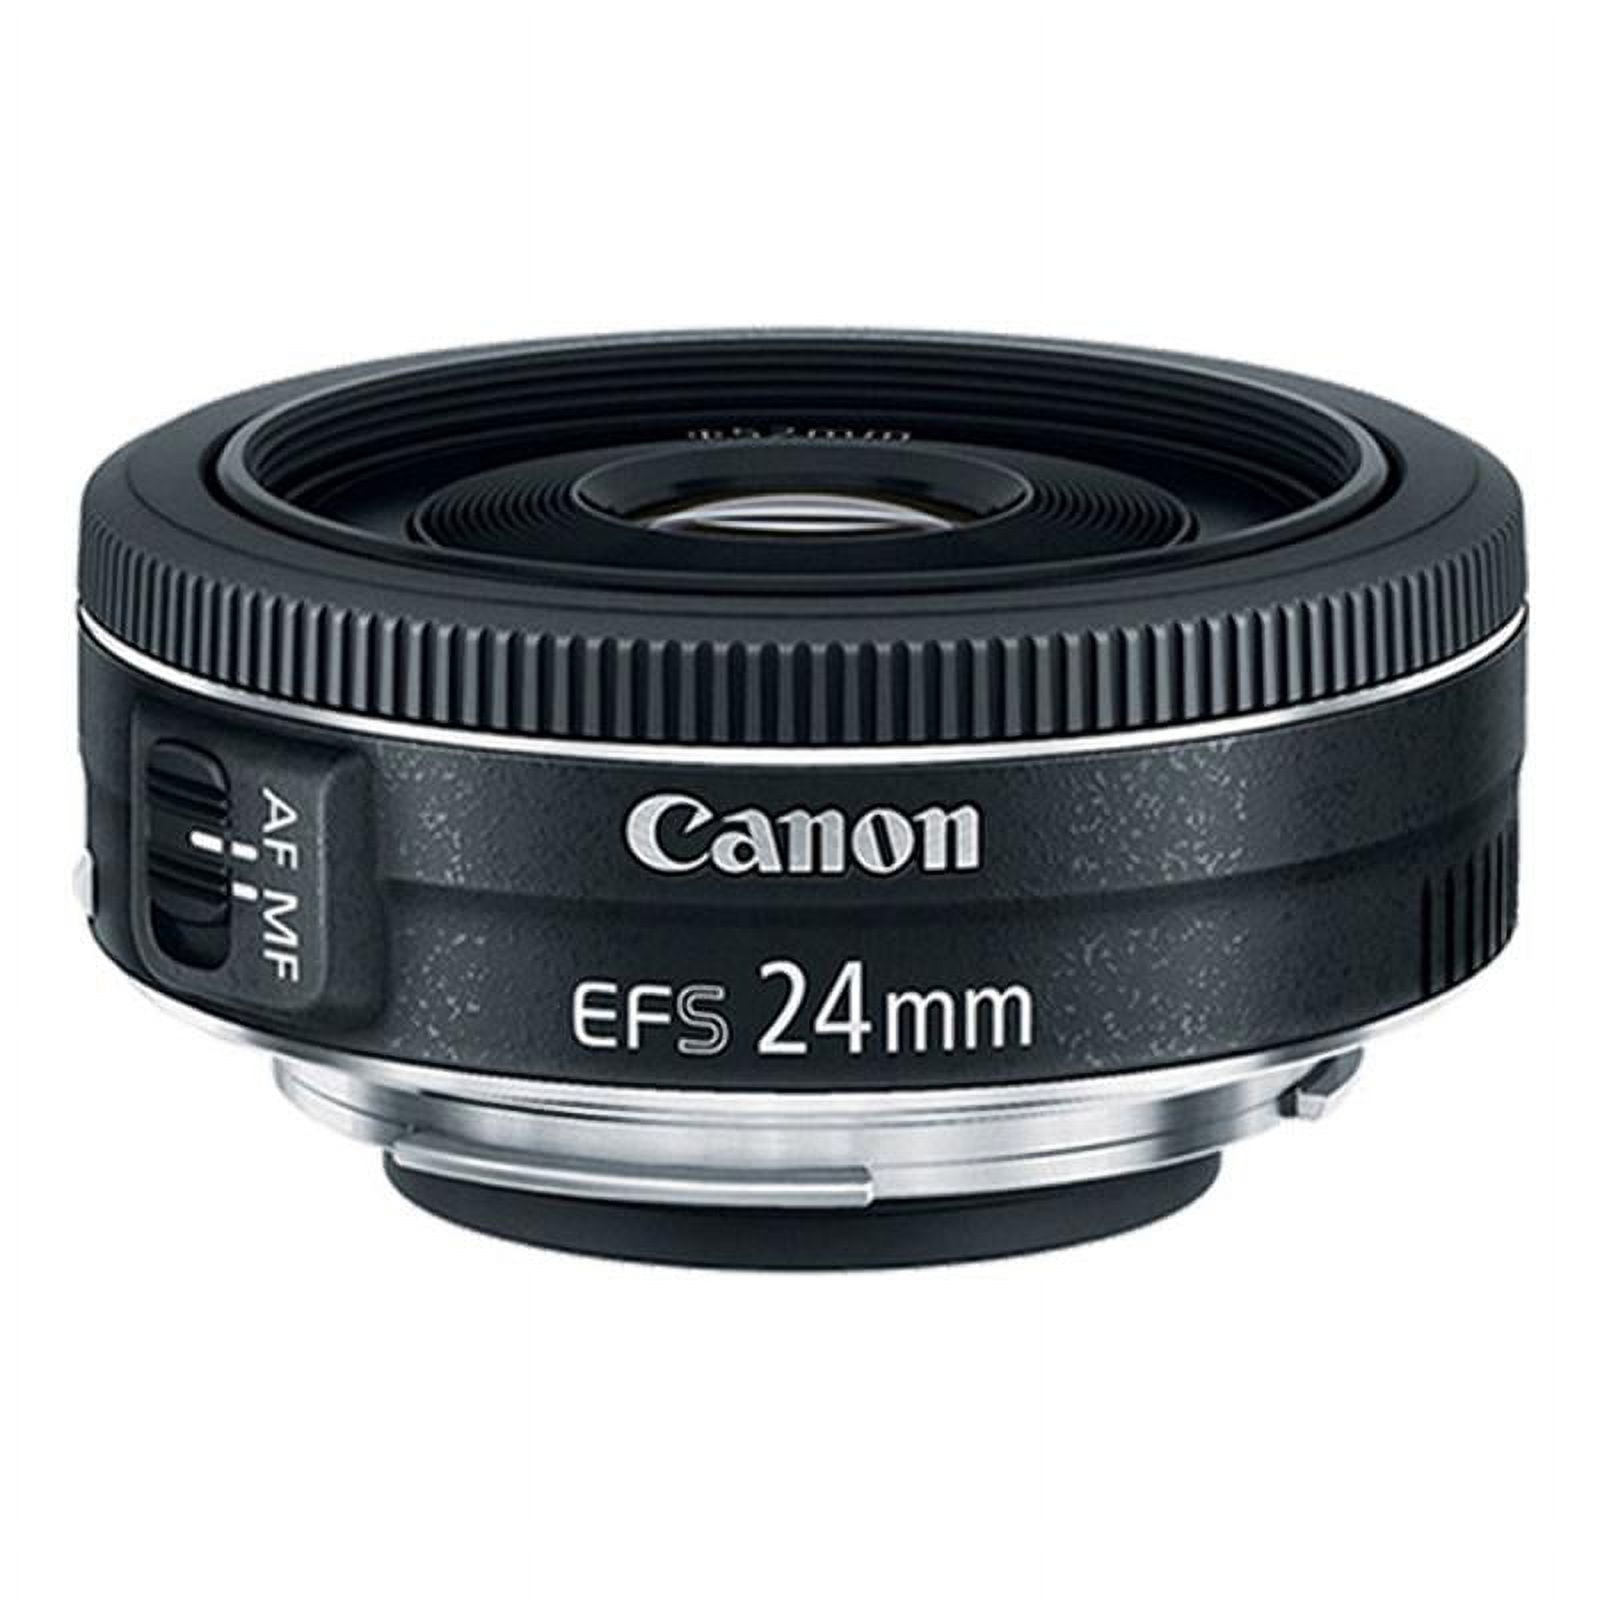 Canon EF-S 24mm f/2.8 STM Lens with Accessory Kit For Canon EOS Rebel T3,  T3i, T5, T5i, and SL2